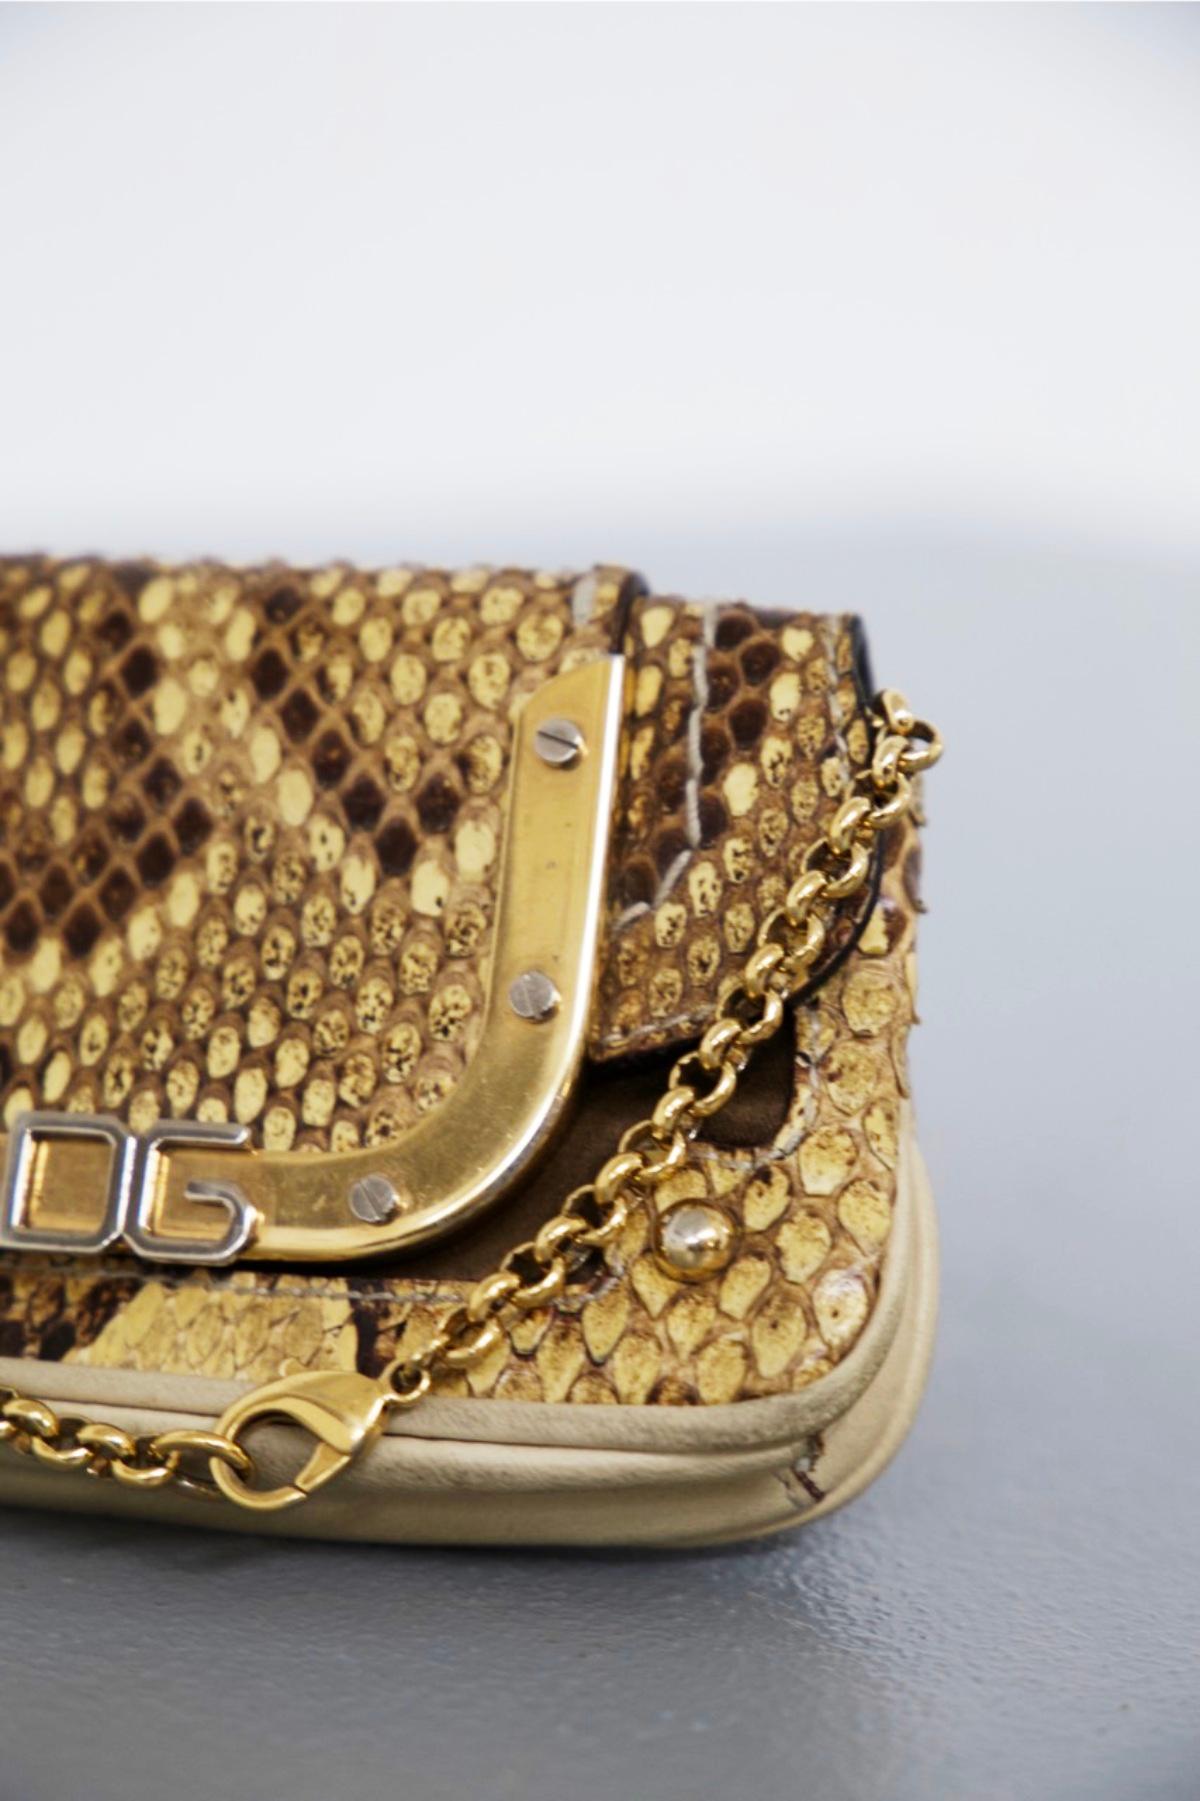 Gorgeous mini bag designed by Dolce & Gabbana n he 1980s, soft leather, made in Italy.
ORIGINAL BRAND.
The purse is really small and entirely made of leather. The texture is the highlight: reminiscent of snakeskin, wonderfully elegant.
Underneath